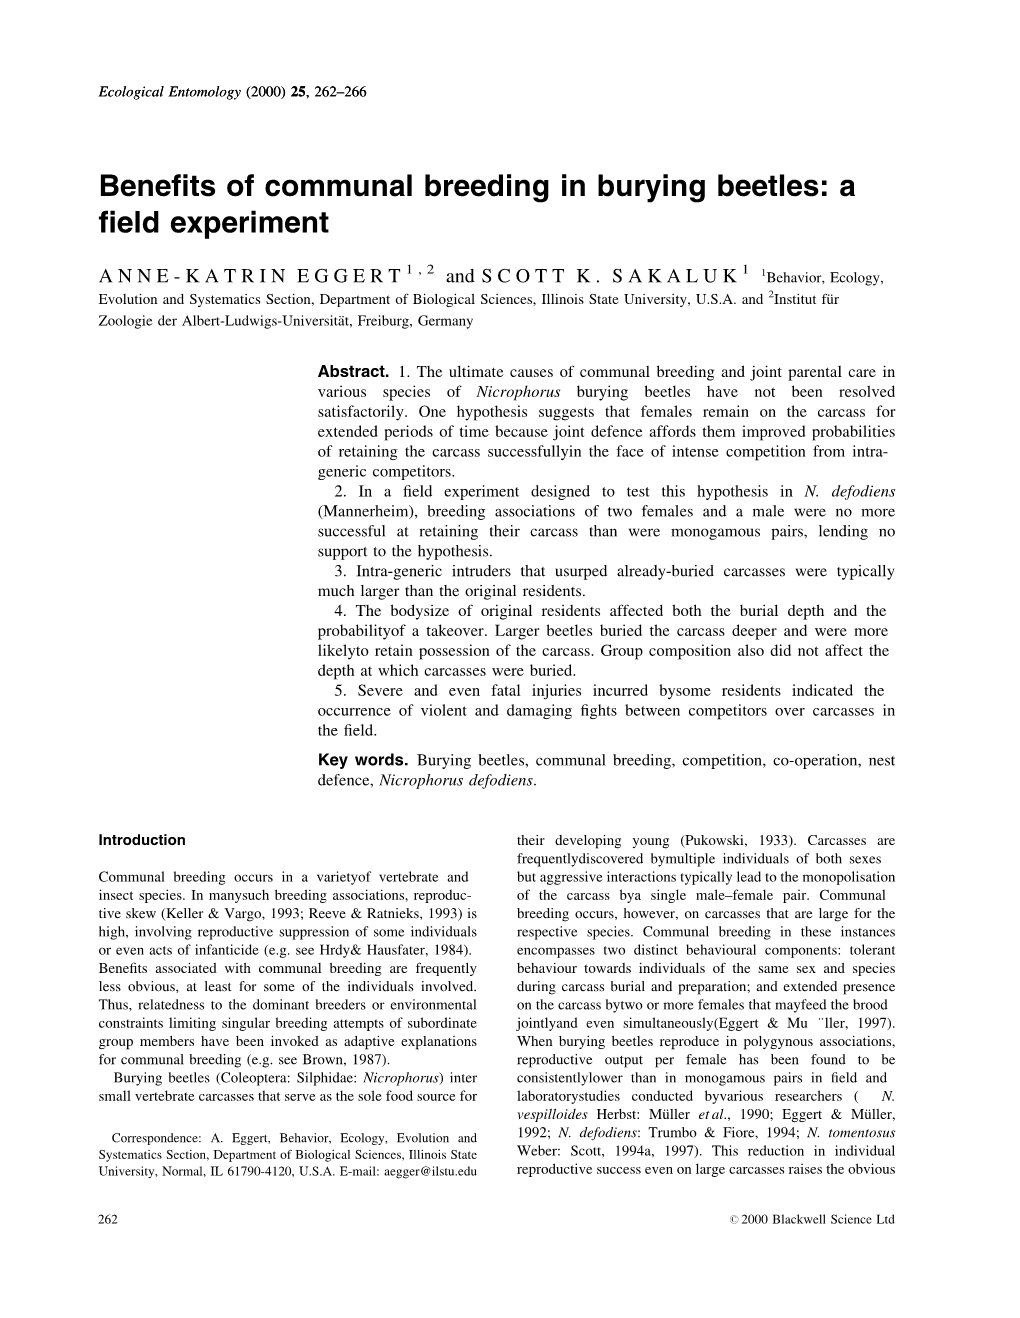 Benefits of Communal Breeding in Burying Beetles: a Field Experiment